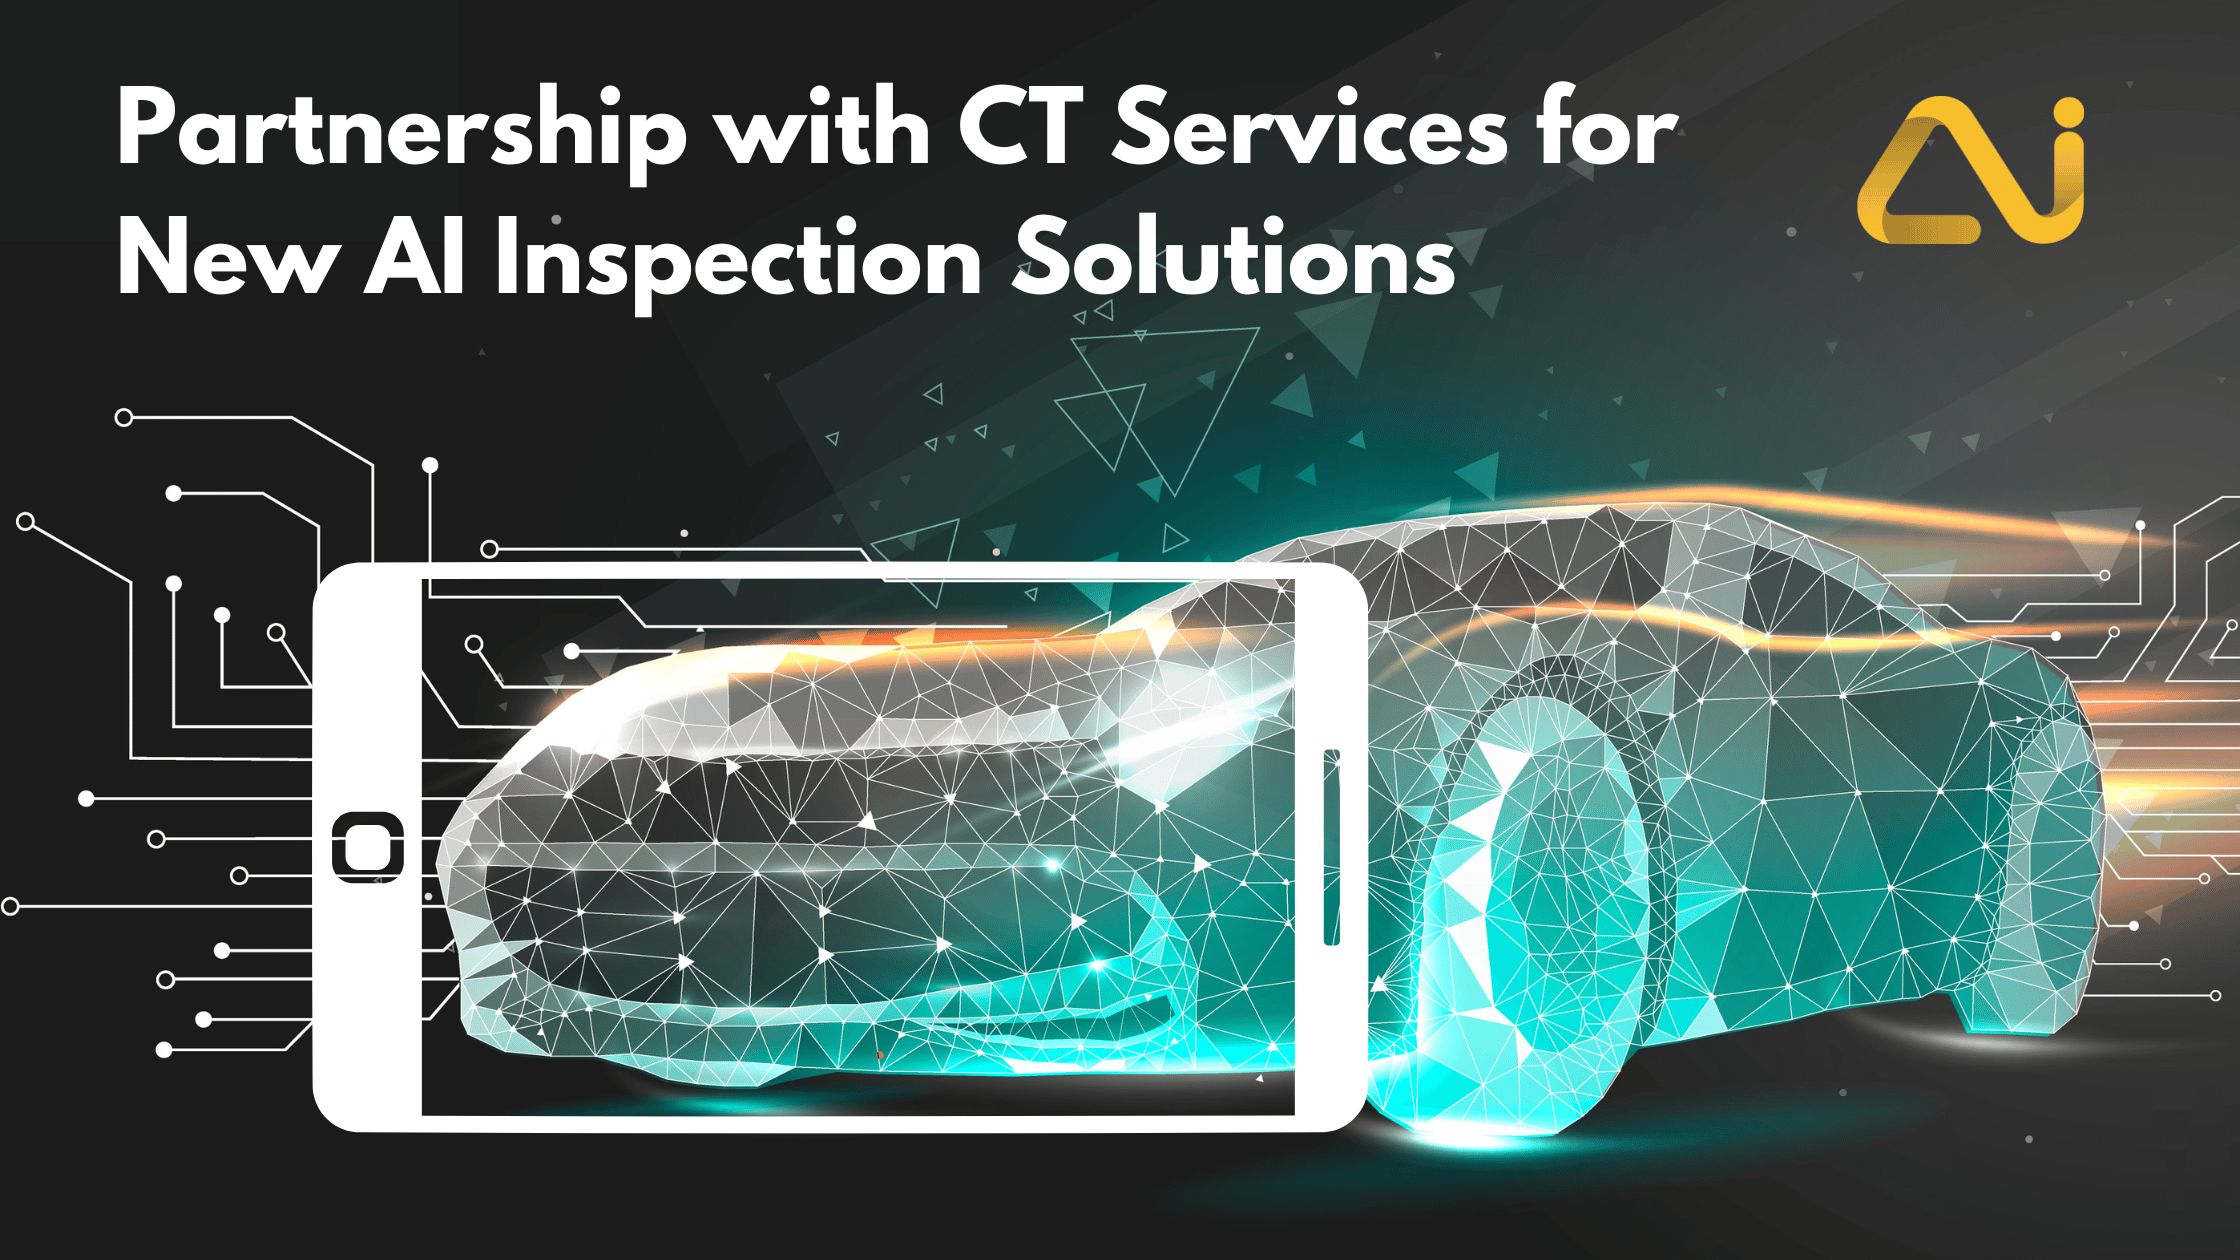 CT Services and Claim Genius Partner on New AI Inspection Solutions